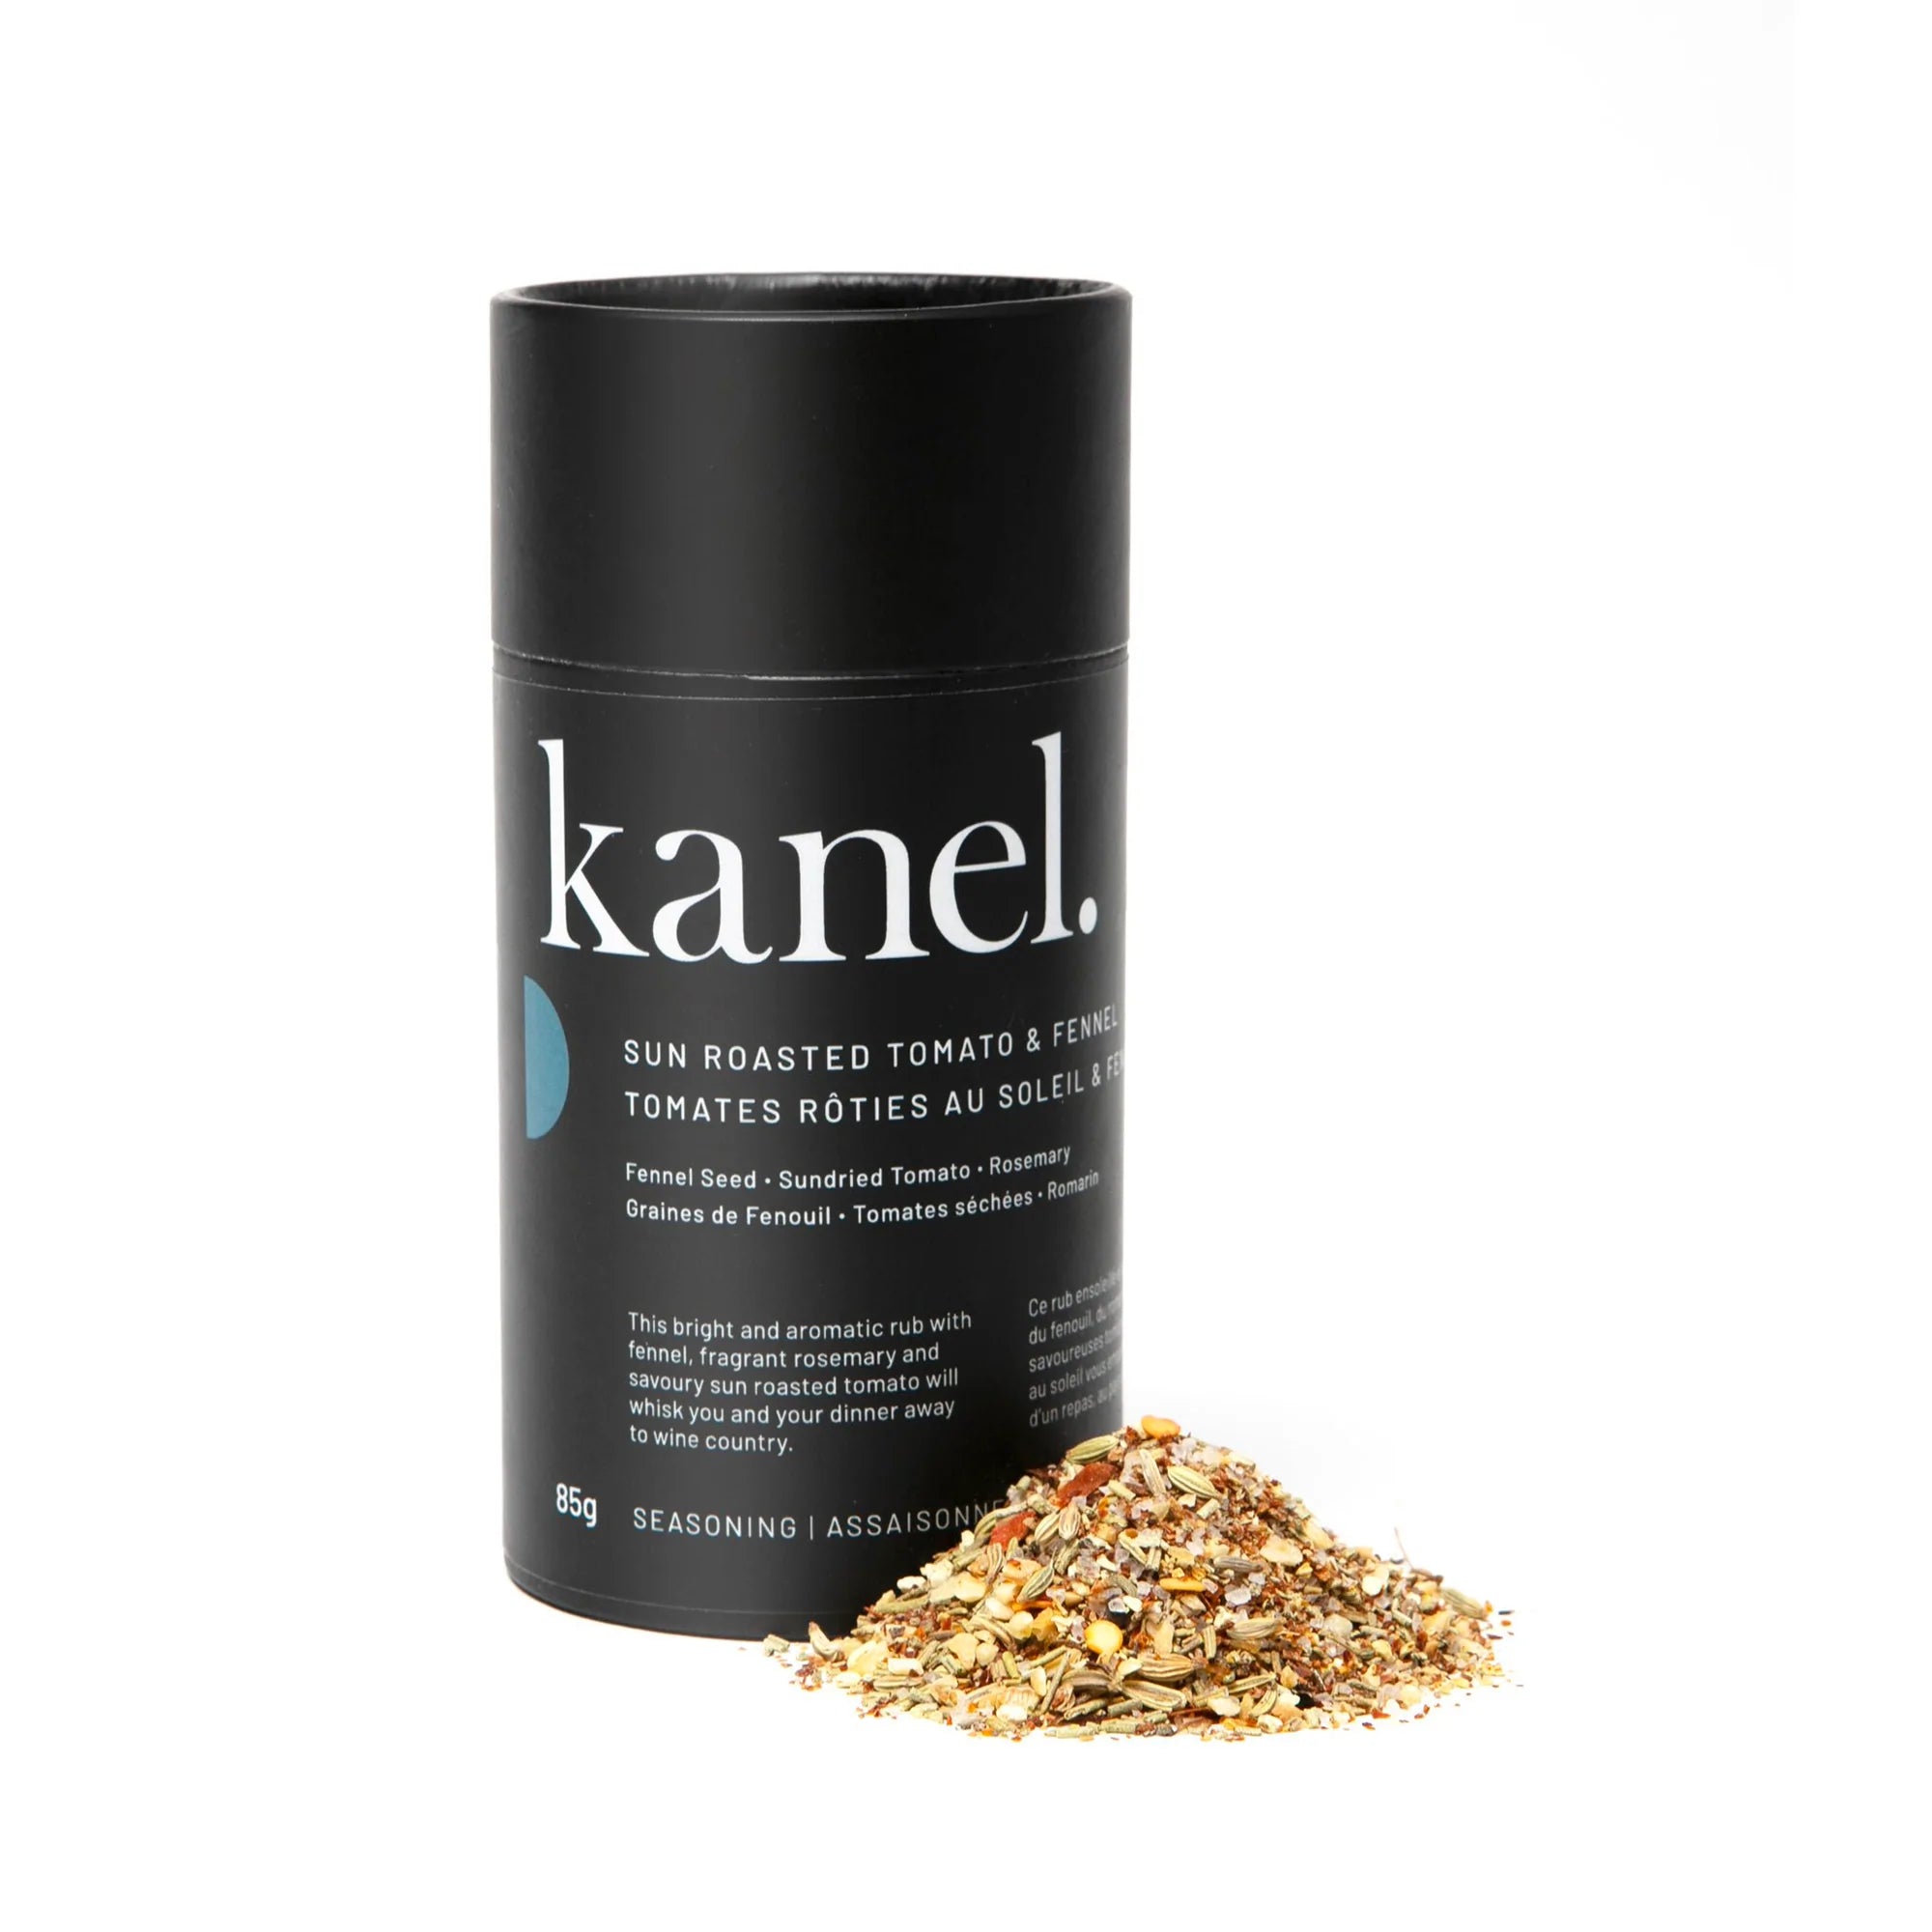 Sun Roasted Tomato & Fennel by Kanel, 85g